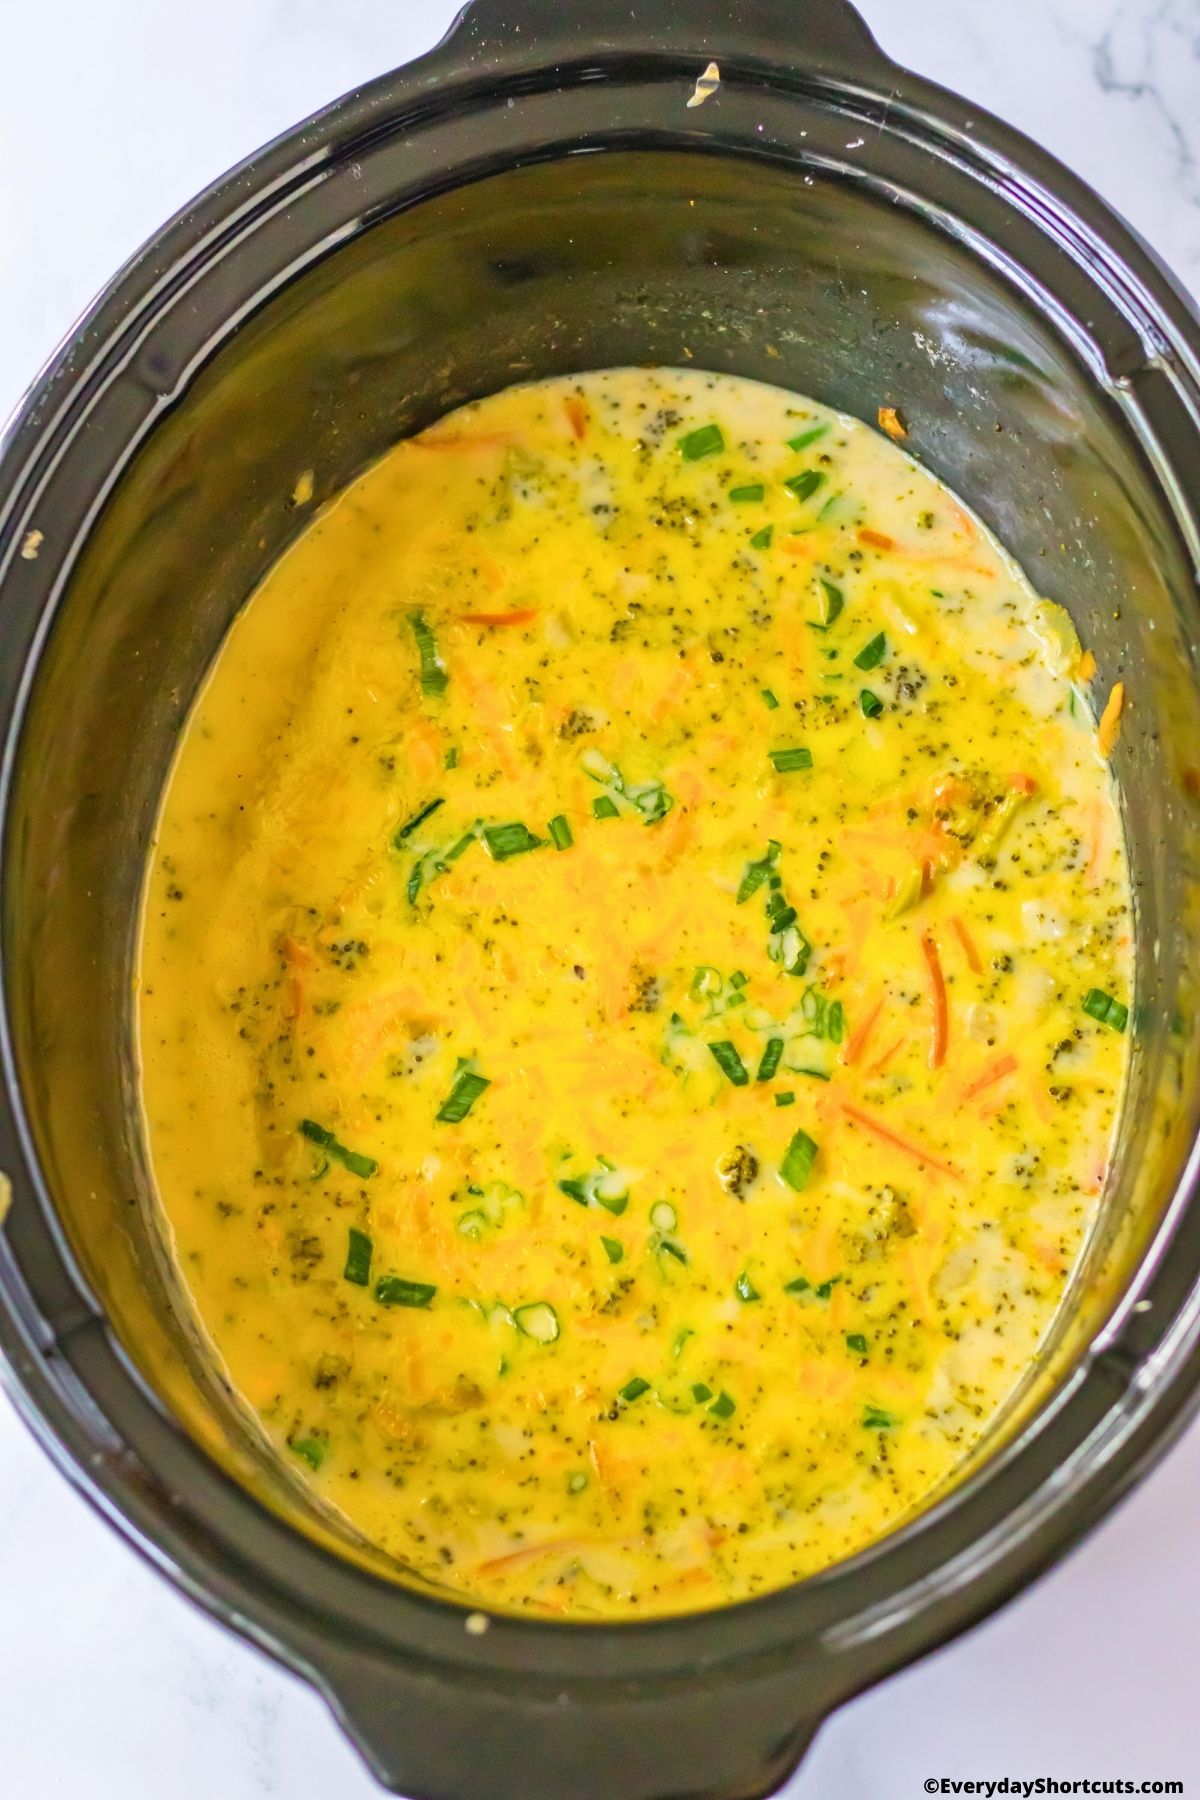 melted cheese in crockpot with broccoli and carrots